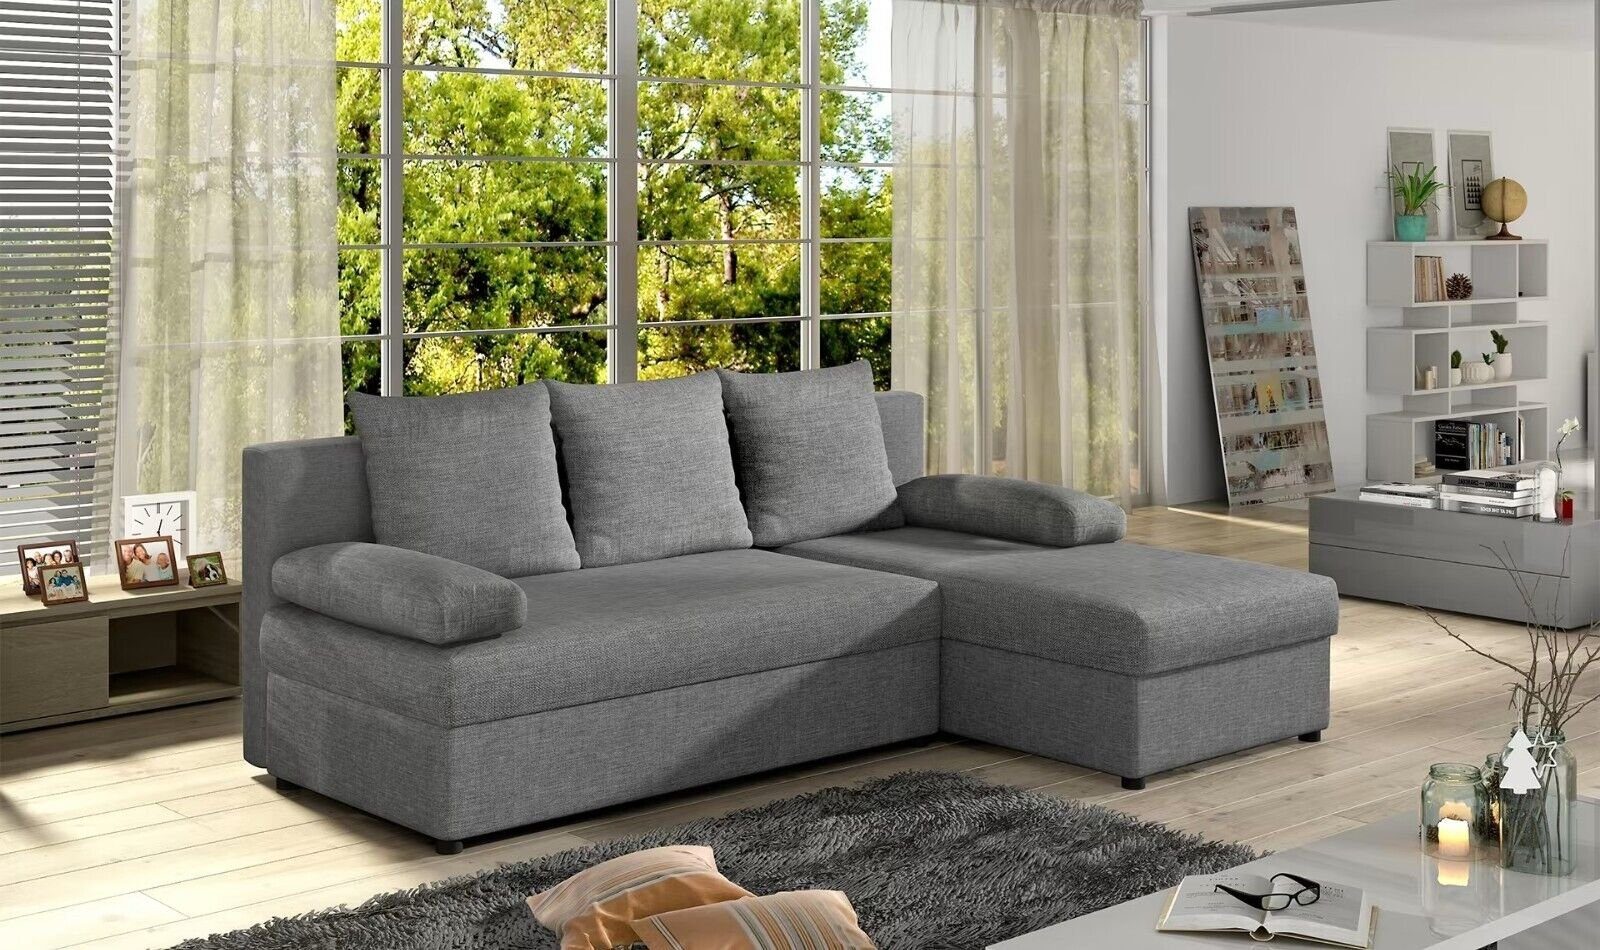 Ecksofa L-Form Sofort, Bettfunktion Polster Europe Schlafsofa JVmoebel Couch in Sofa Made Couch Grau Design